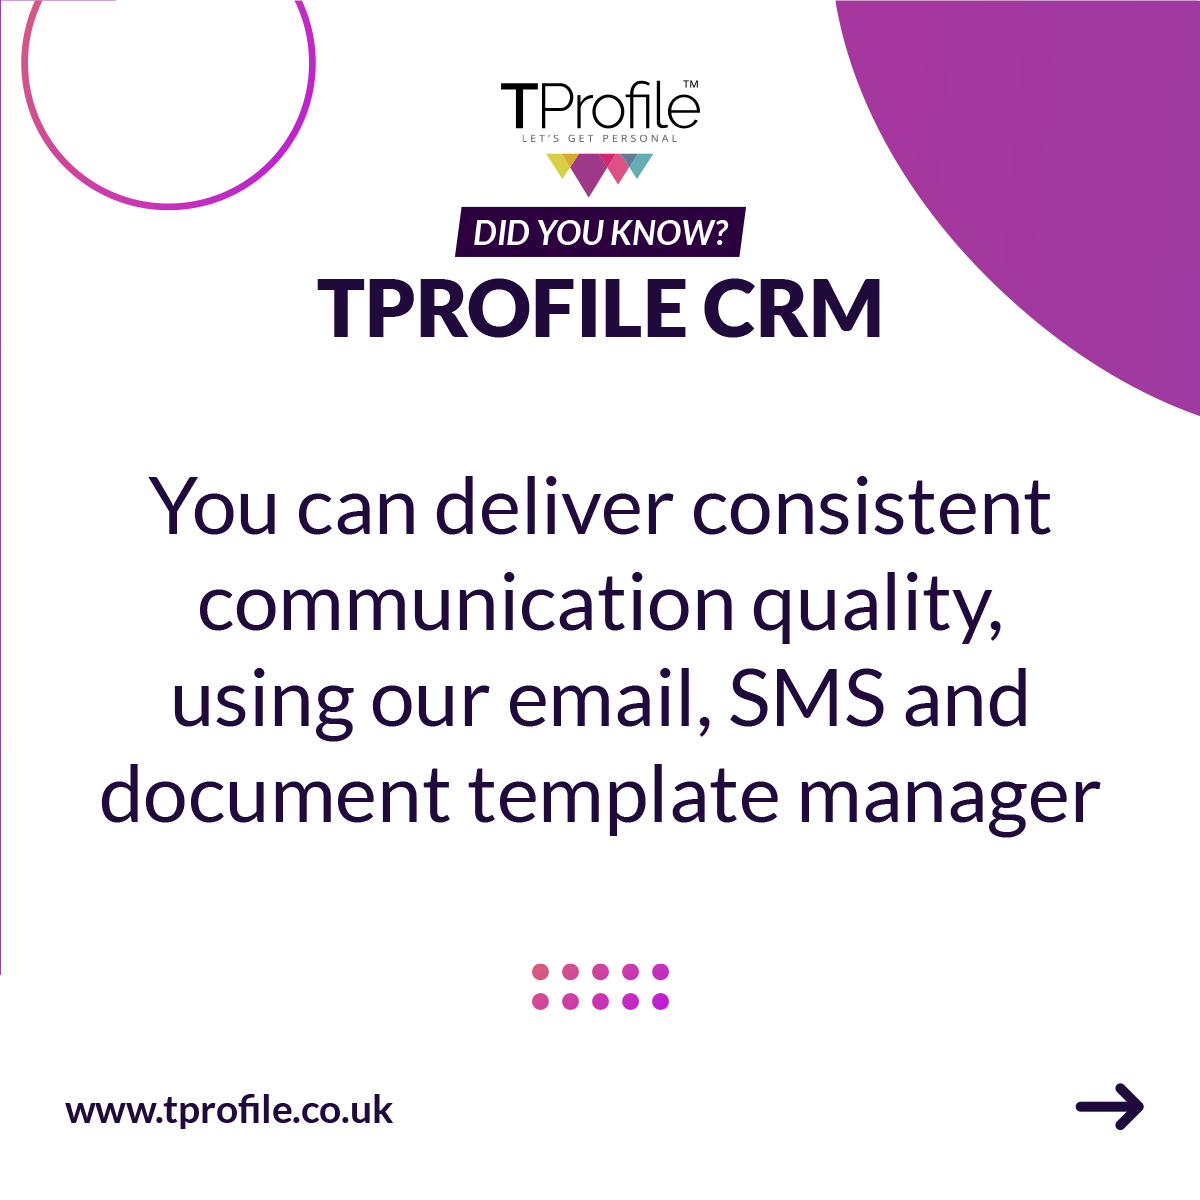 #DidYouKnow that our dedicated travel CRM facilitates total management of both individual & group bookings? Book your free demo now to learn more about how TProfile can help you and your travel business: tprofile.co.uk/book-tprofile-… #CRM #TravelCRM #TProfile #travelindustry